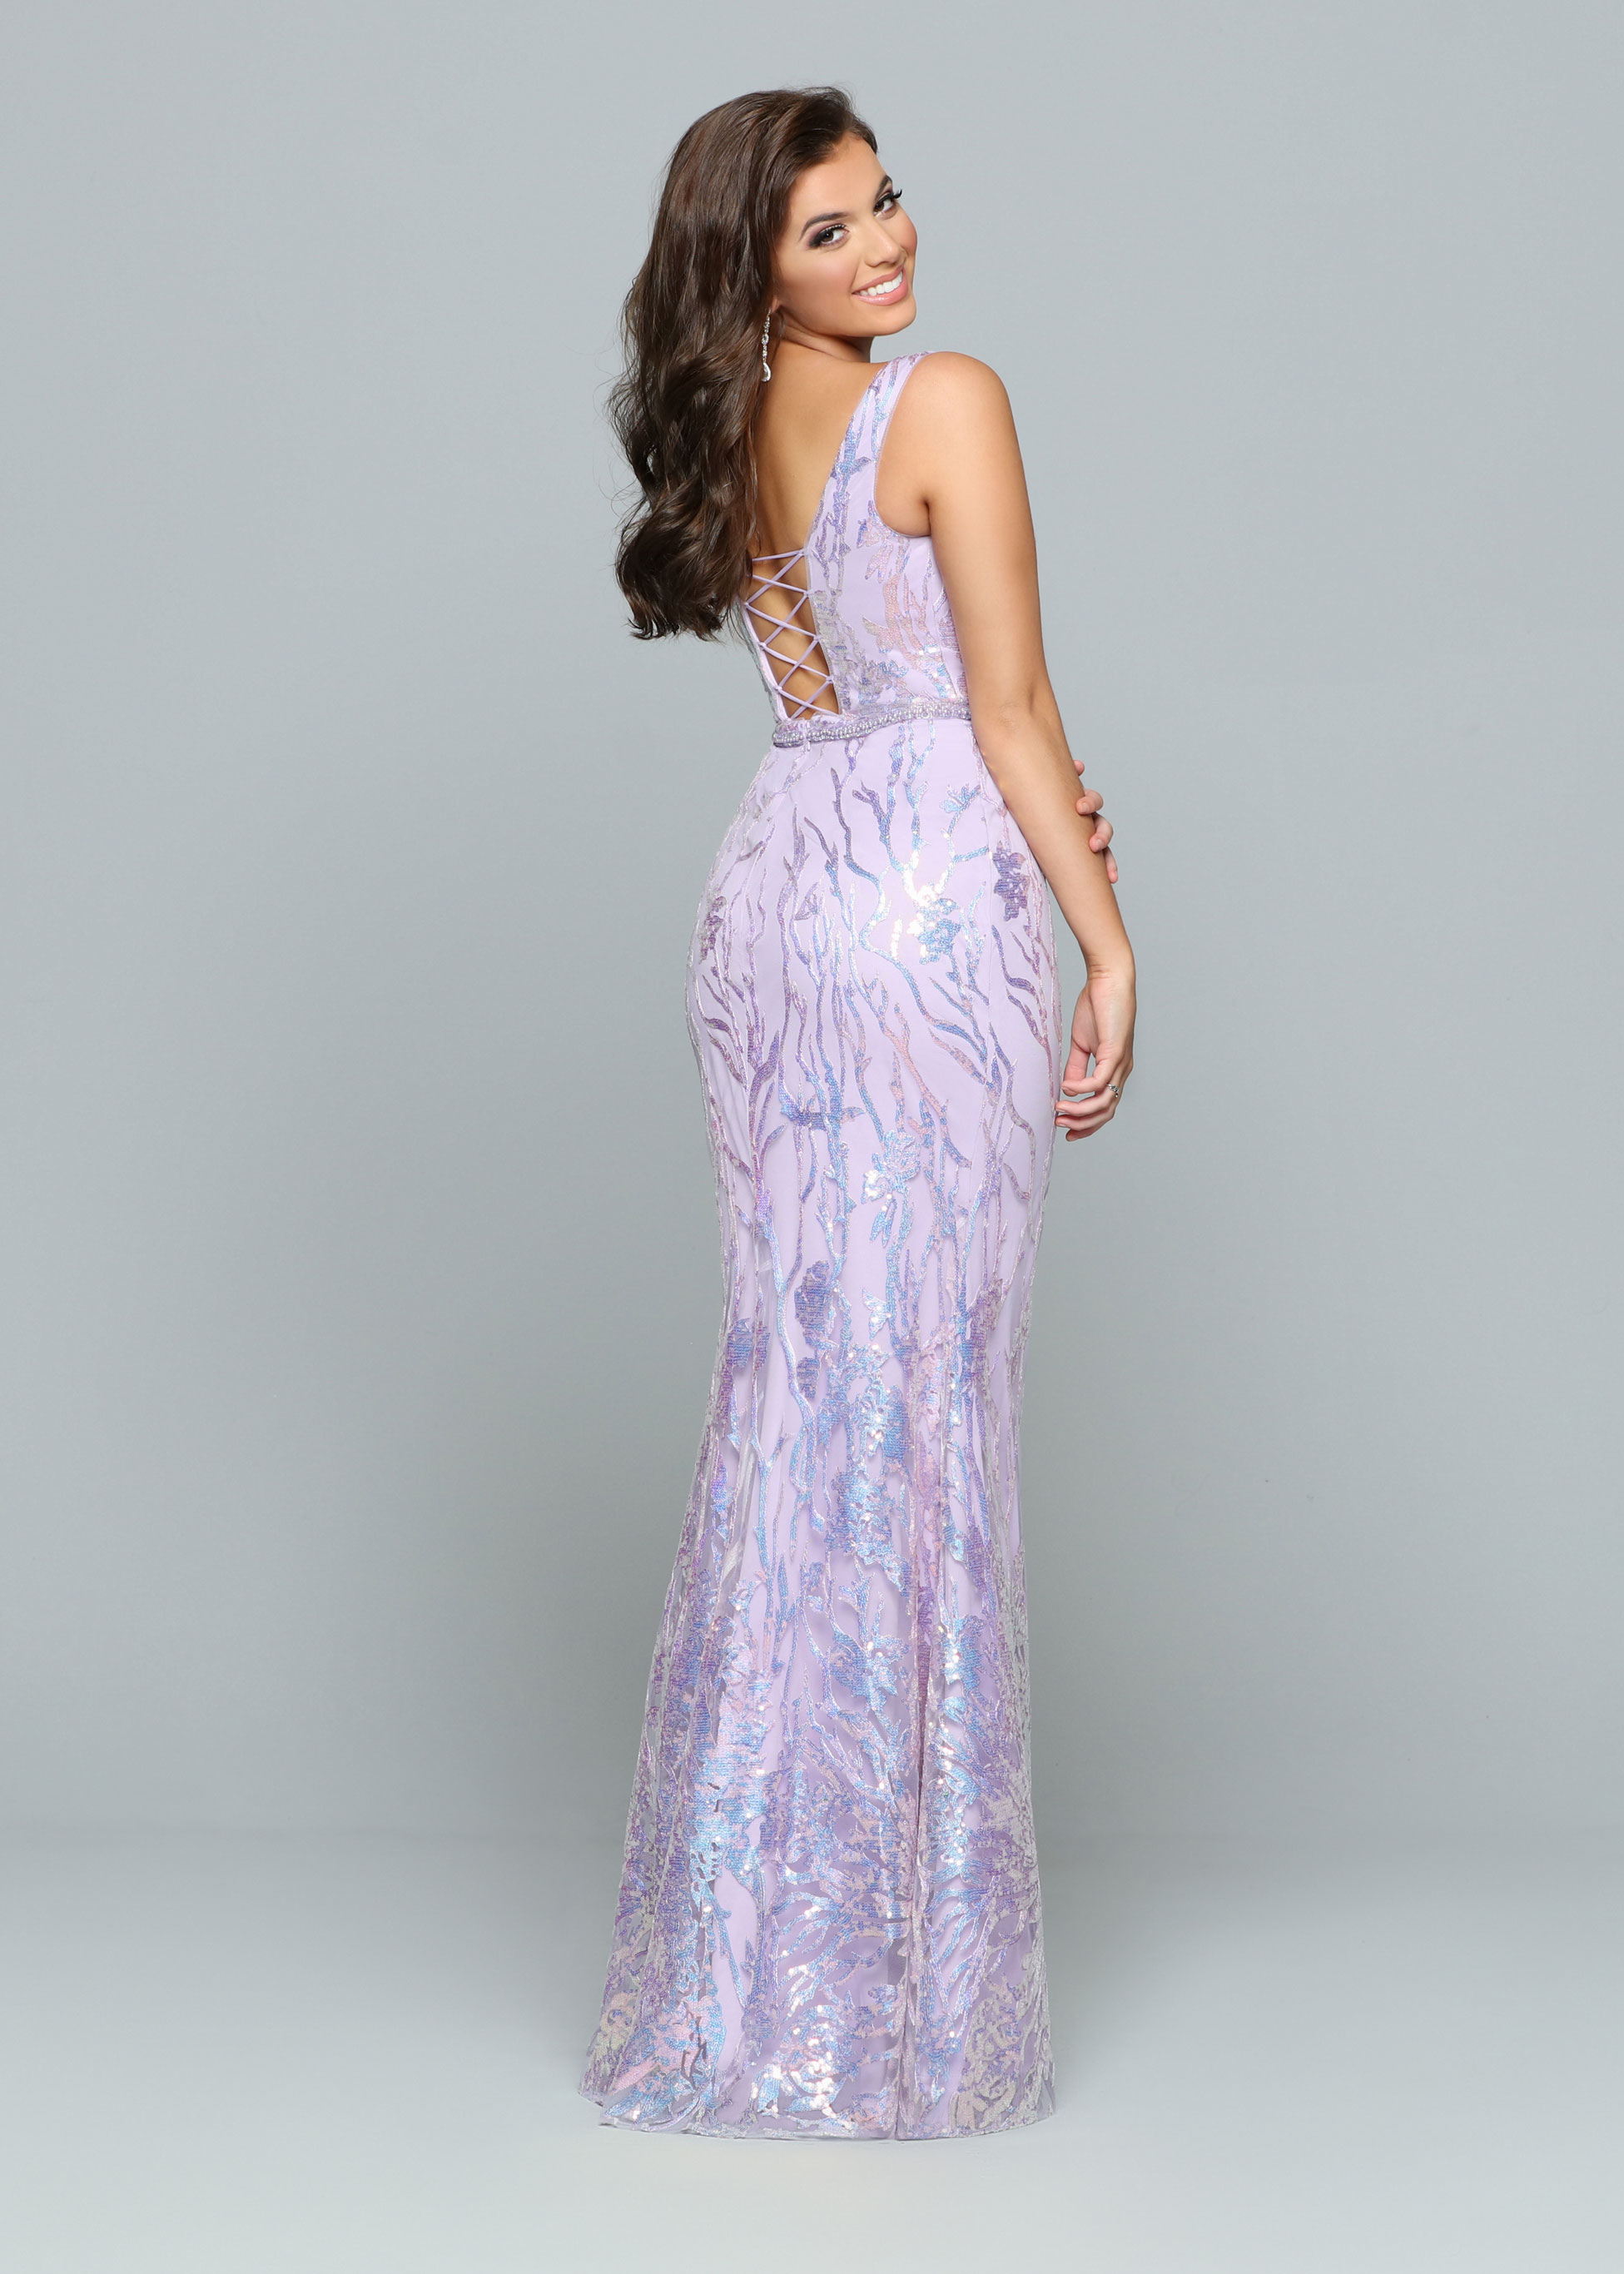 Image showing back view of style #72158